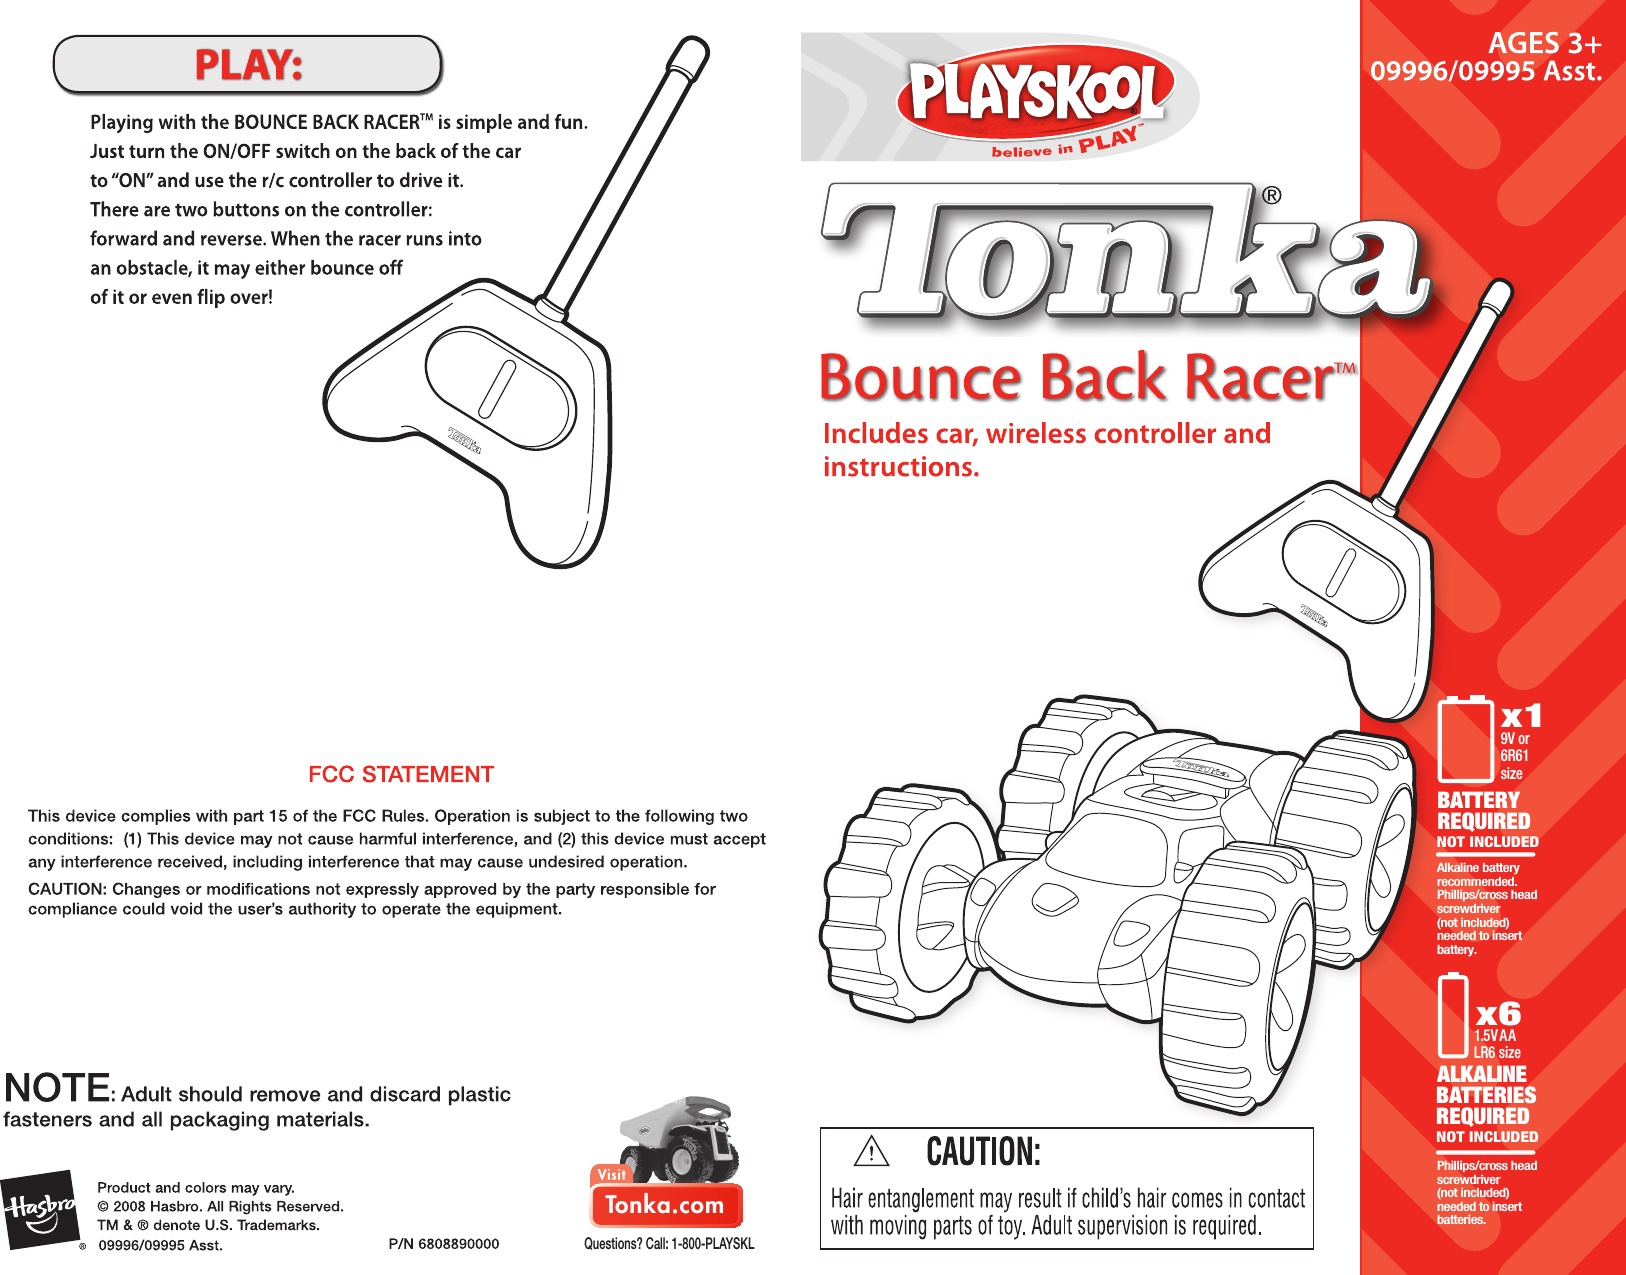 *Tonka.comQuestions? Call: 1-800-PLAYSKLx61.5V AALR6 sizePhillips/cross head screwdriver (not included) needed to insert batteries.BATTERIESALKALINEREQUIREDNOT INCLUDED9V or6R61sizeBATTERYREQUIREDx1Alkaline battery recommended.Phillips/cross head screwdriver (not included) needed to insert battery.NOT INCLUDED